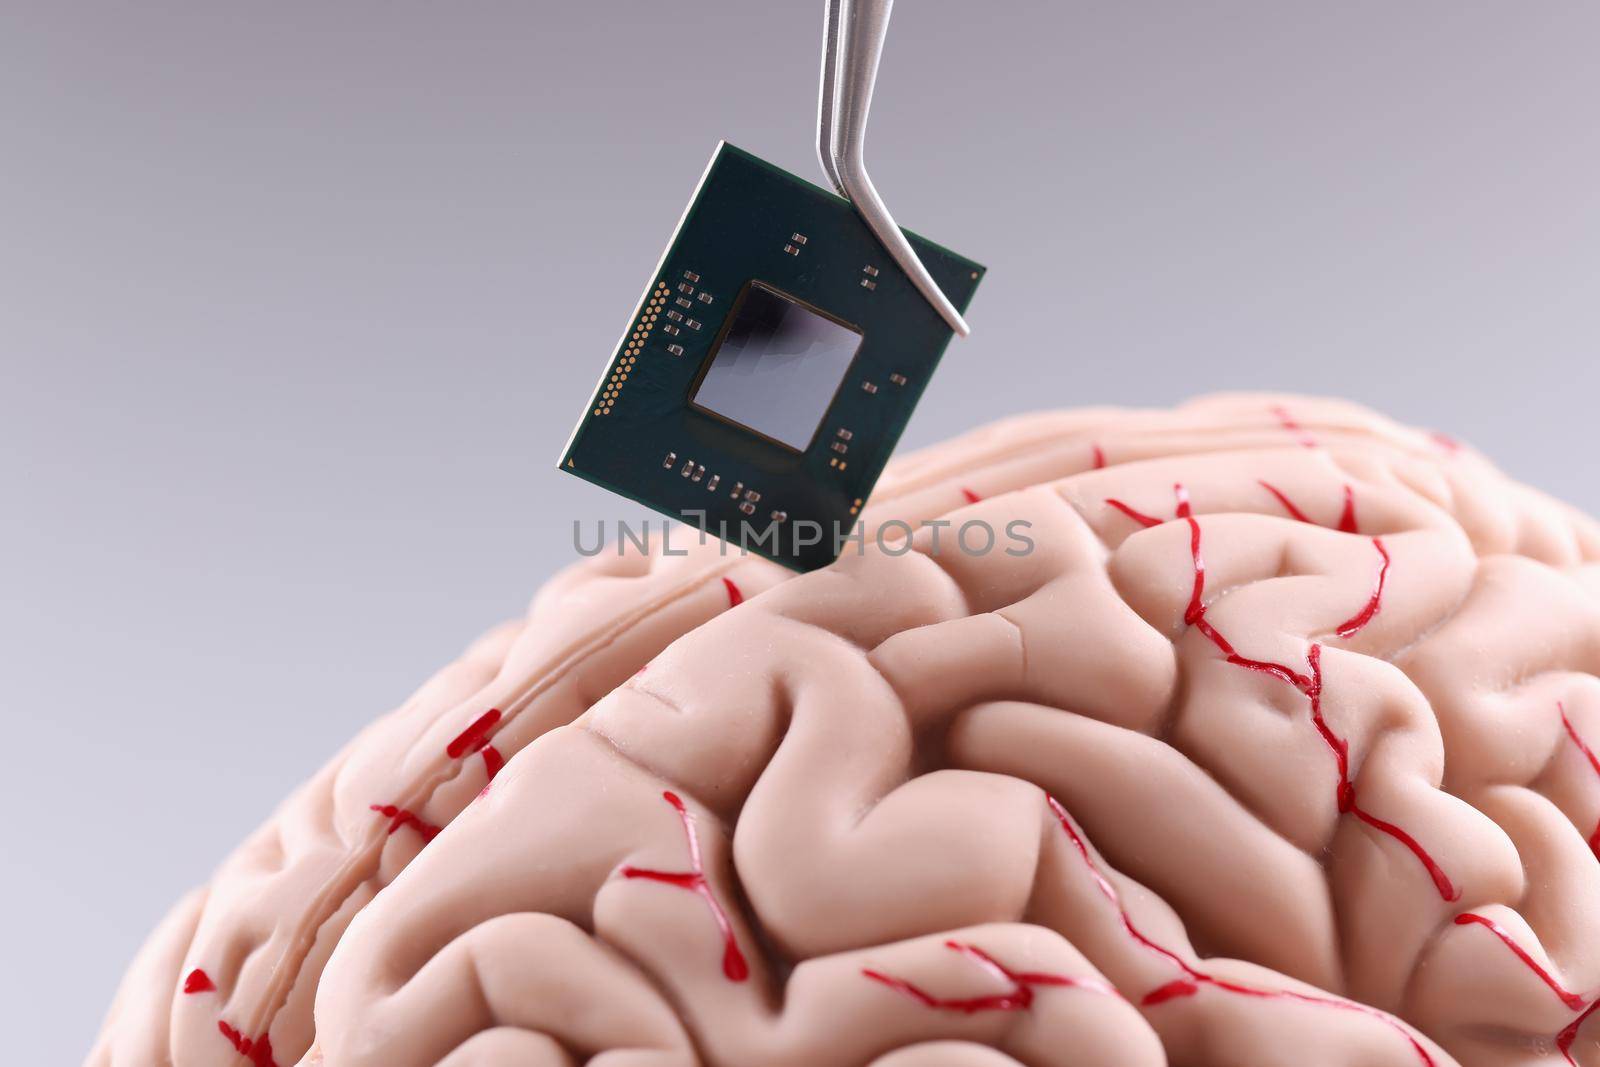 Human brain and computer chip. Microprocessor in head by kuprevich